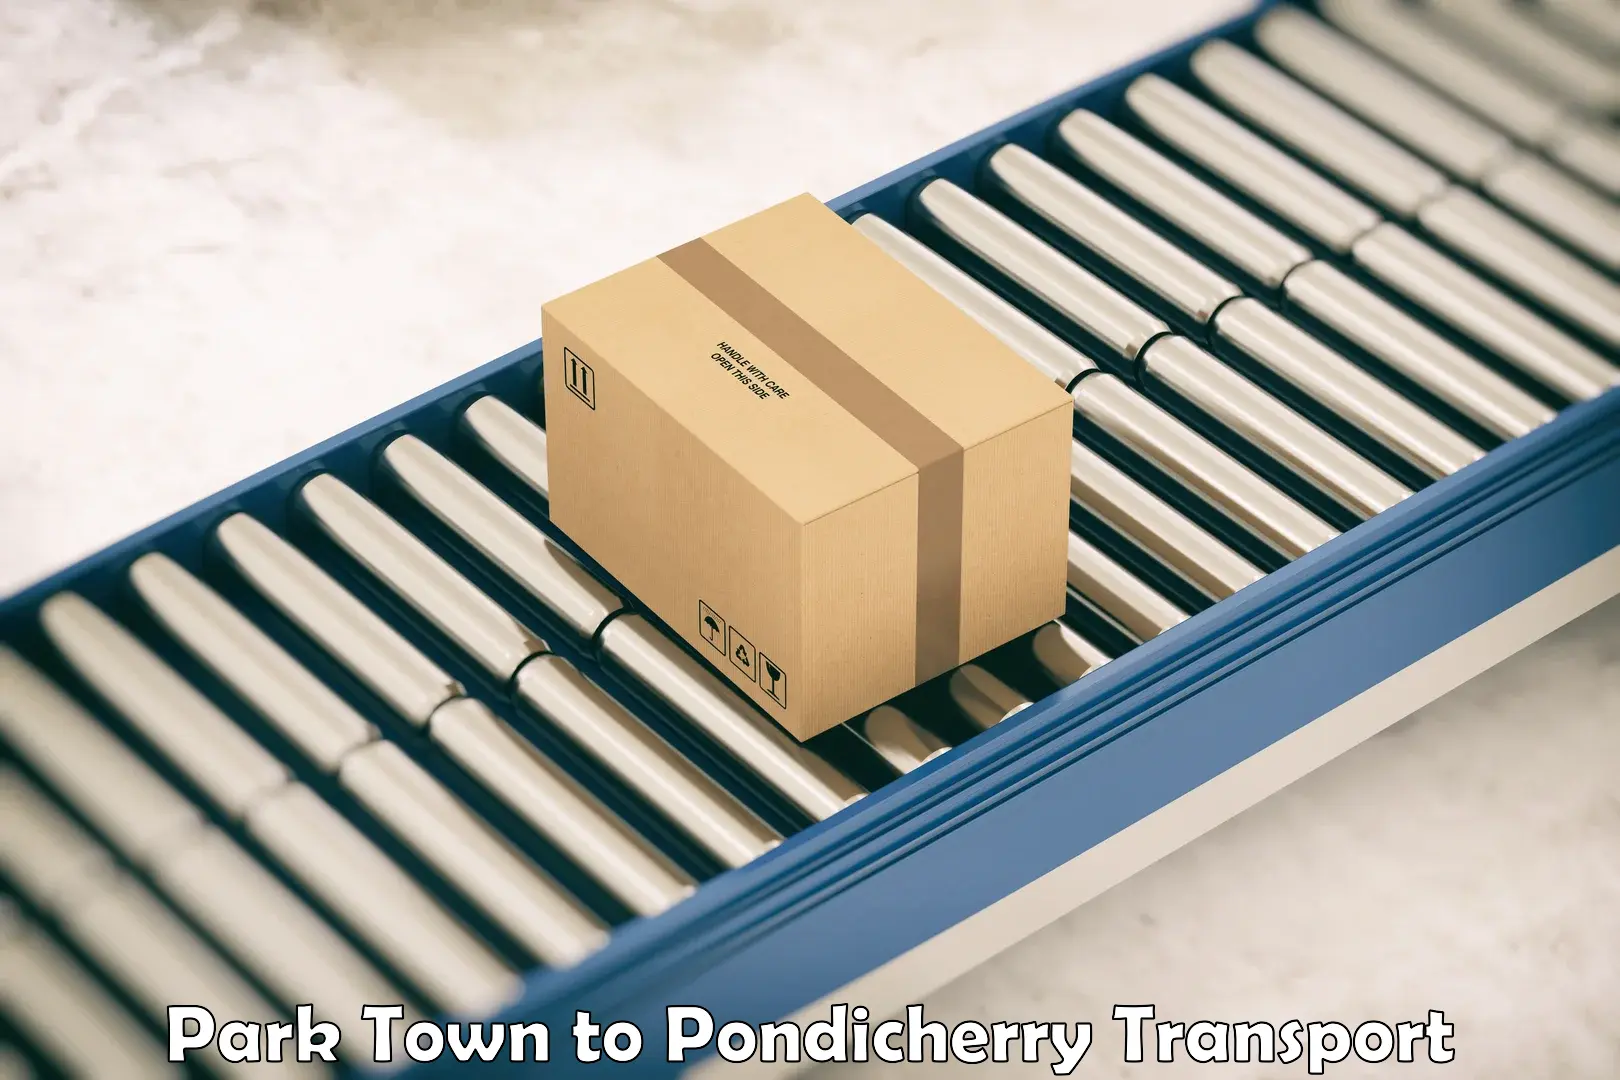 Container transport service Park Town to Pondicherry